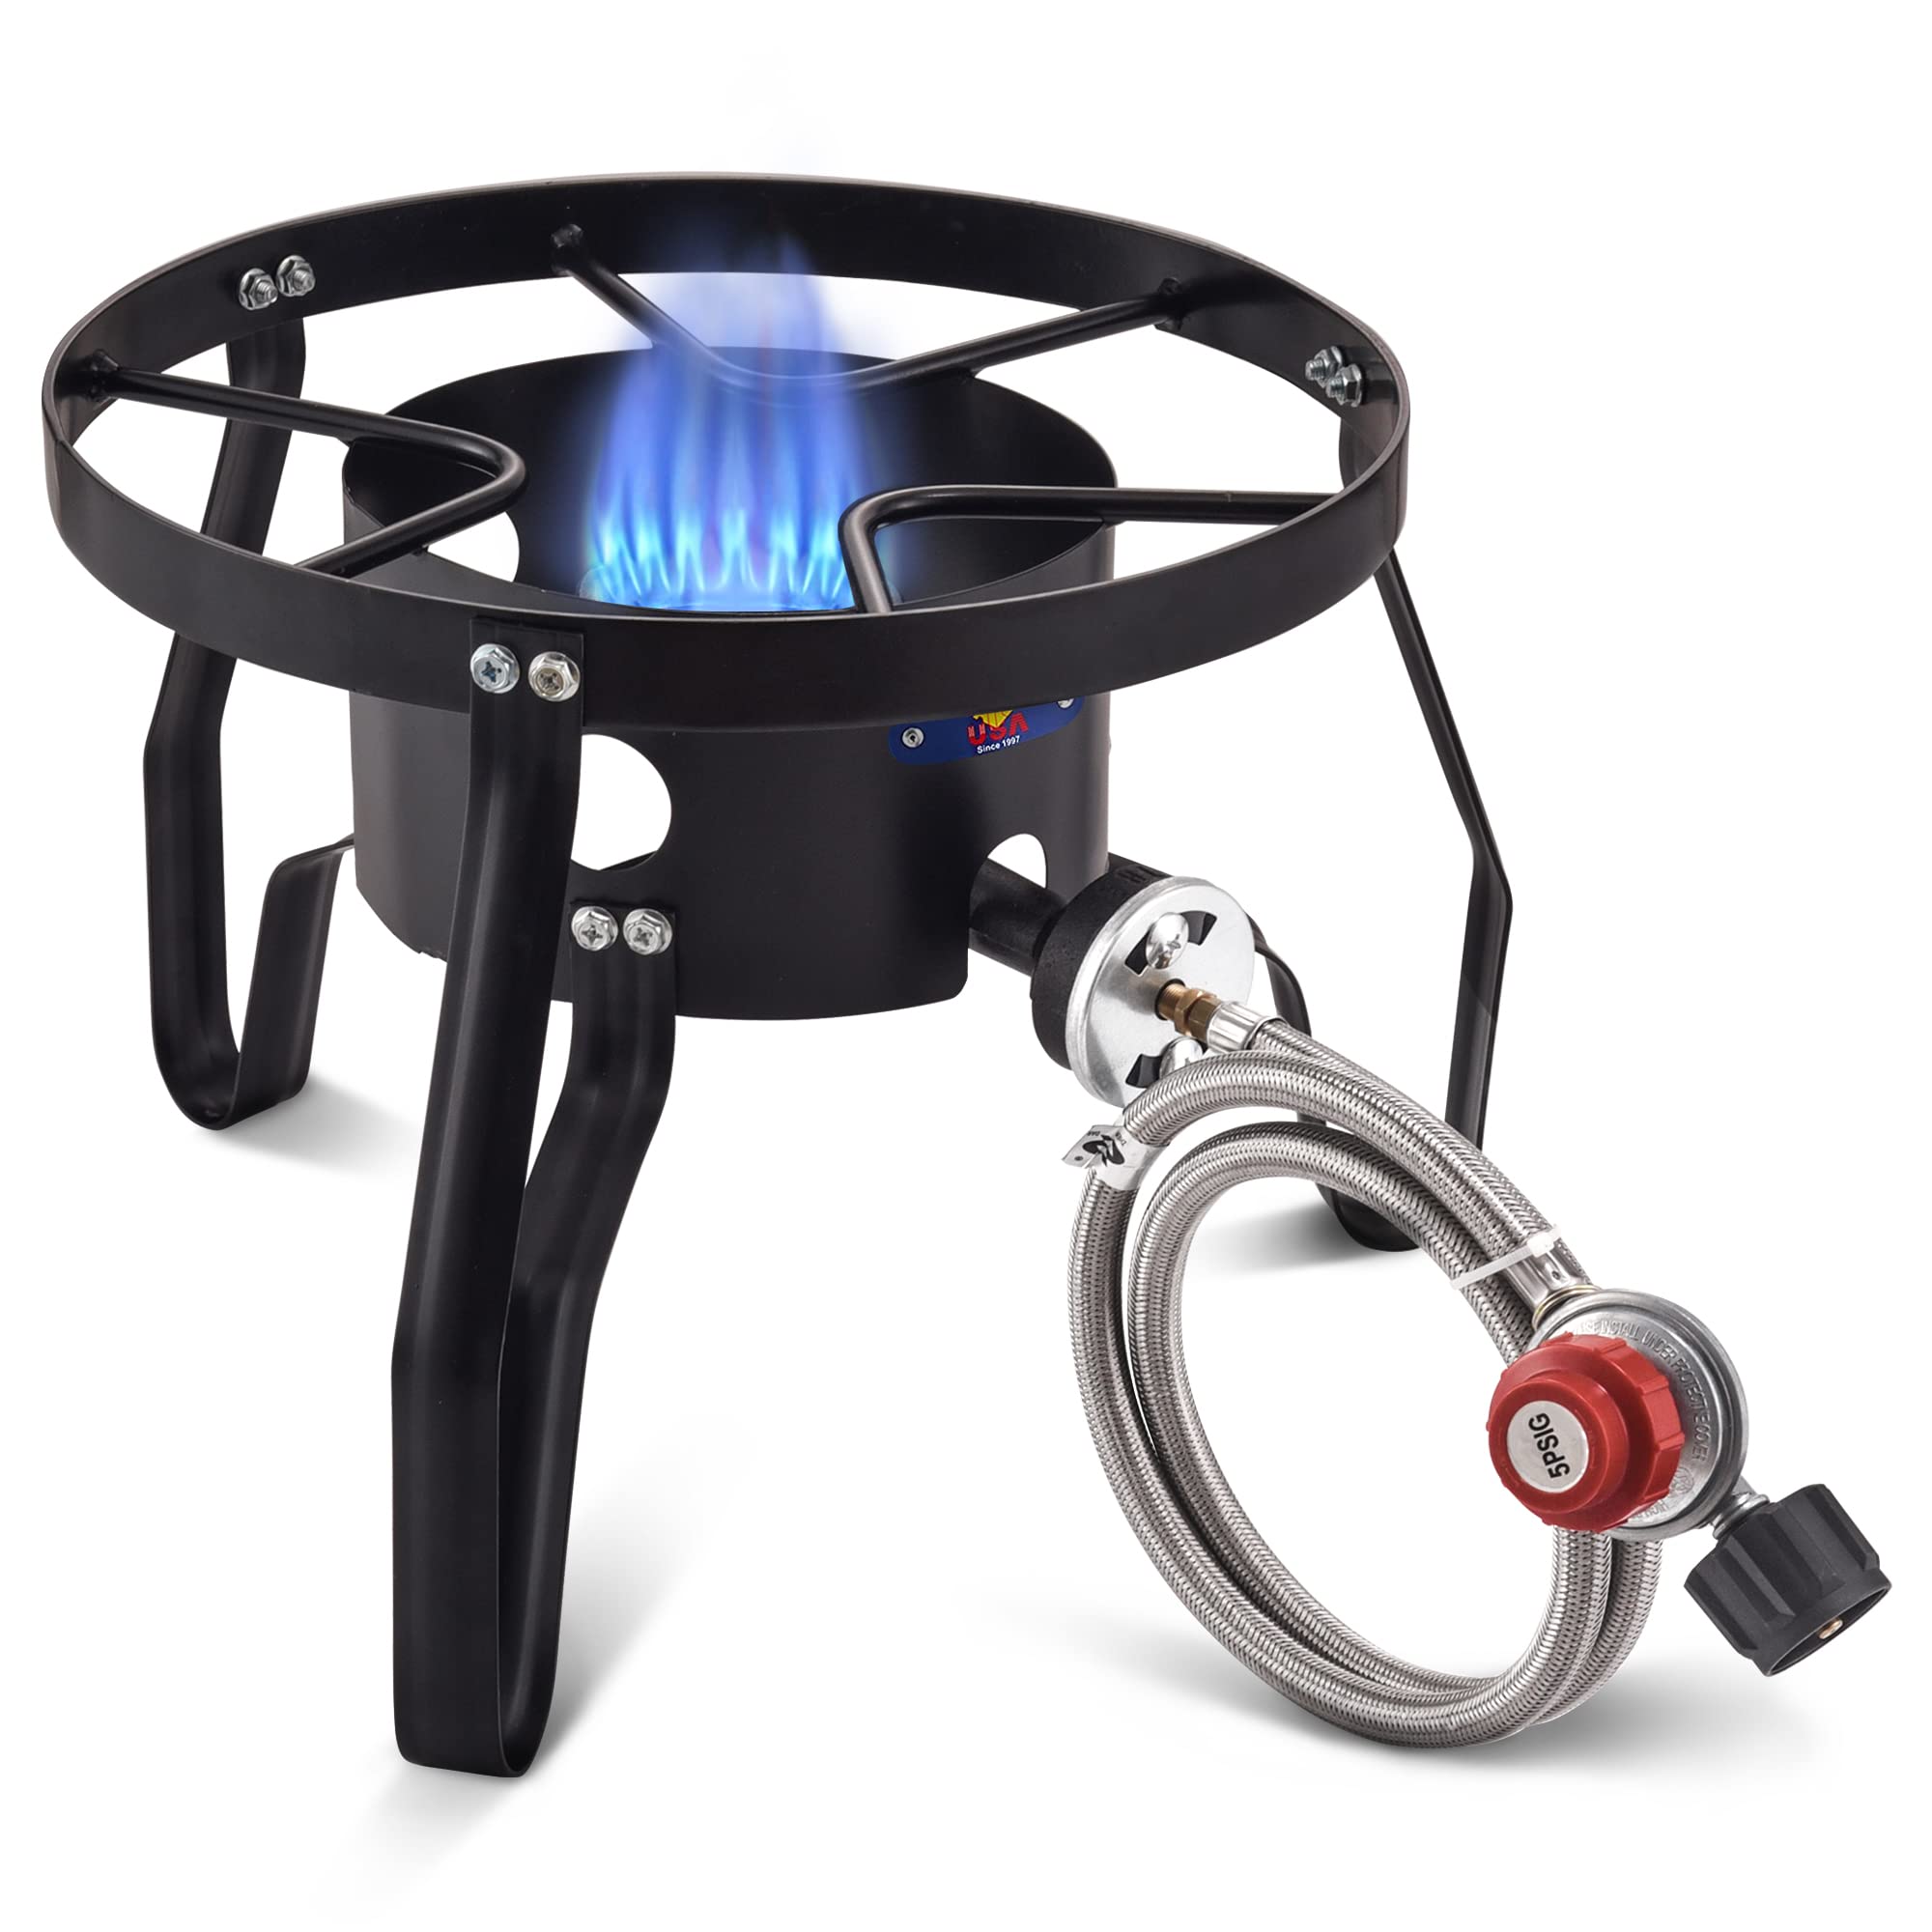 ARC Camping Propane Stove Outdoor Cooker Propane Burner for Outdoor Cooking Round Burner Ideal for Camping Tailgating Tra